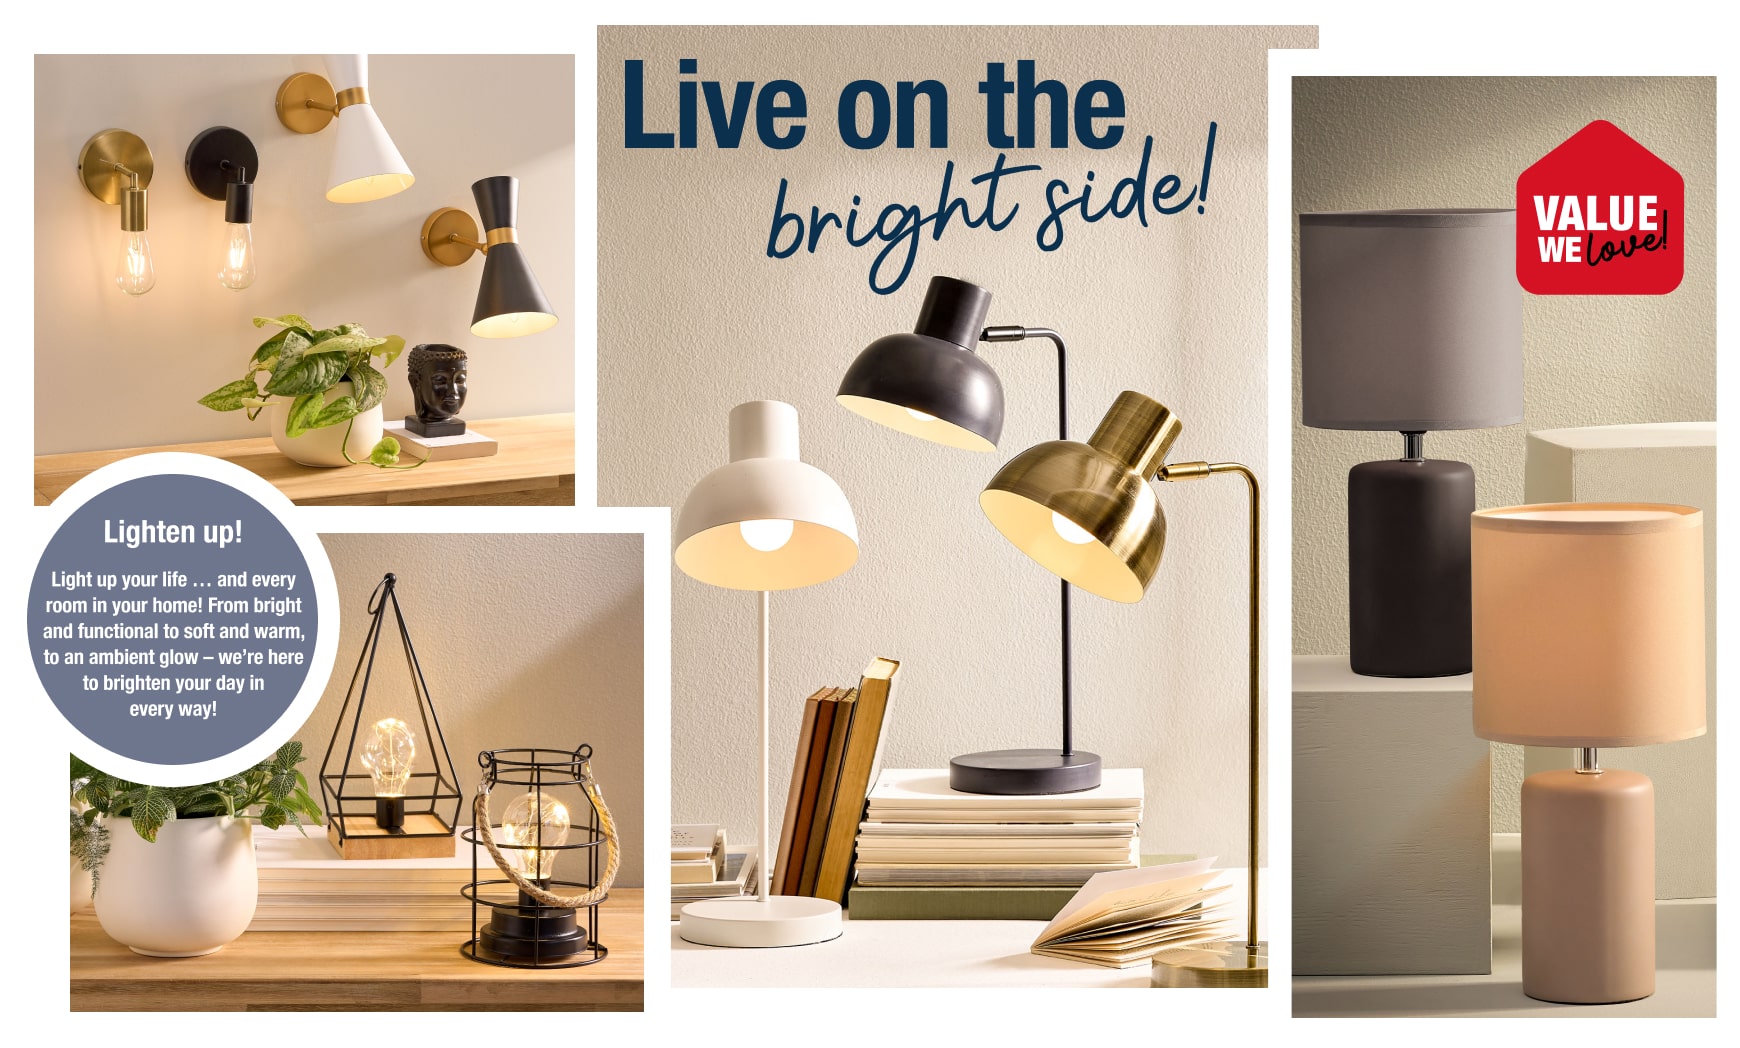 Mr Price Home's wide range of lamp sets, lamp bases & shades, hanging lighting, and lighting utilities can be found in the lighting category